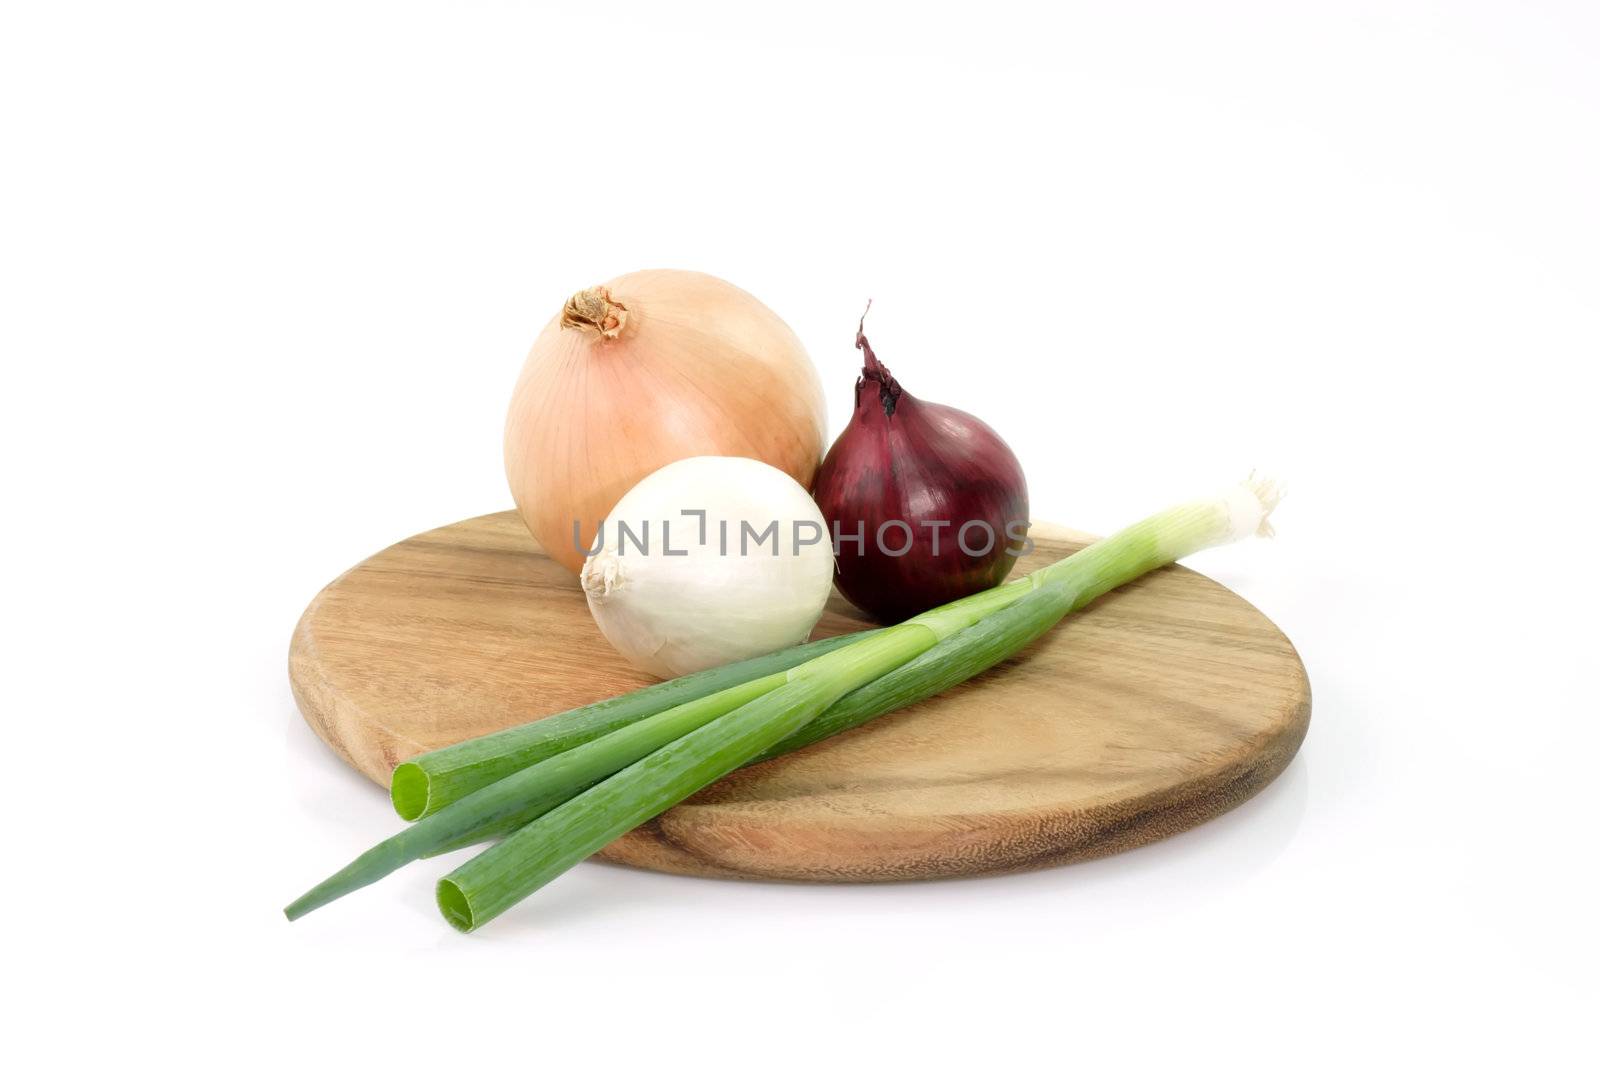 Onions on a wooden board by Teamarbeit